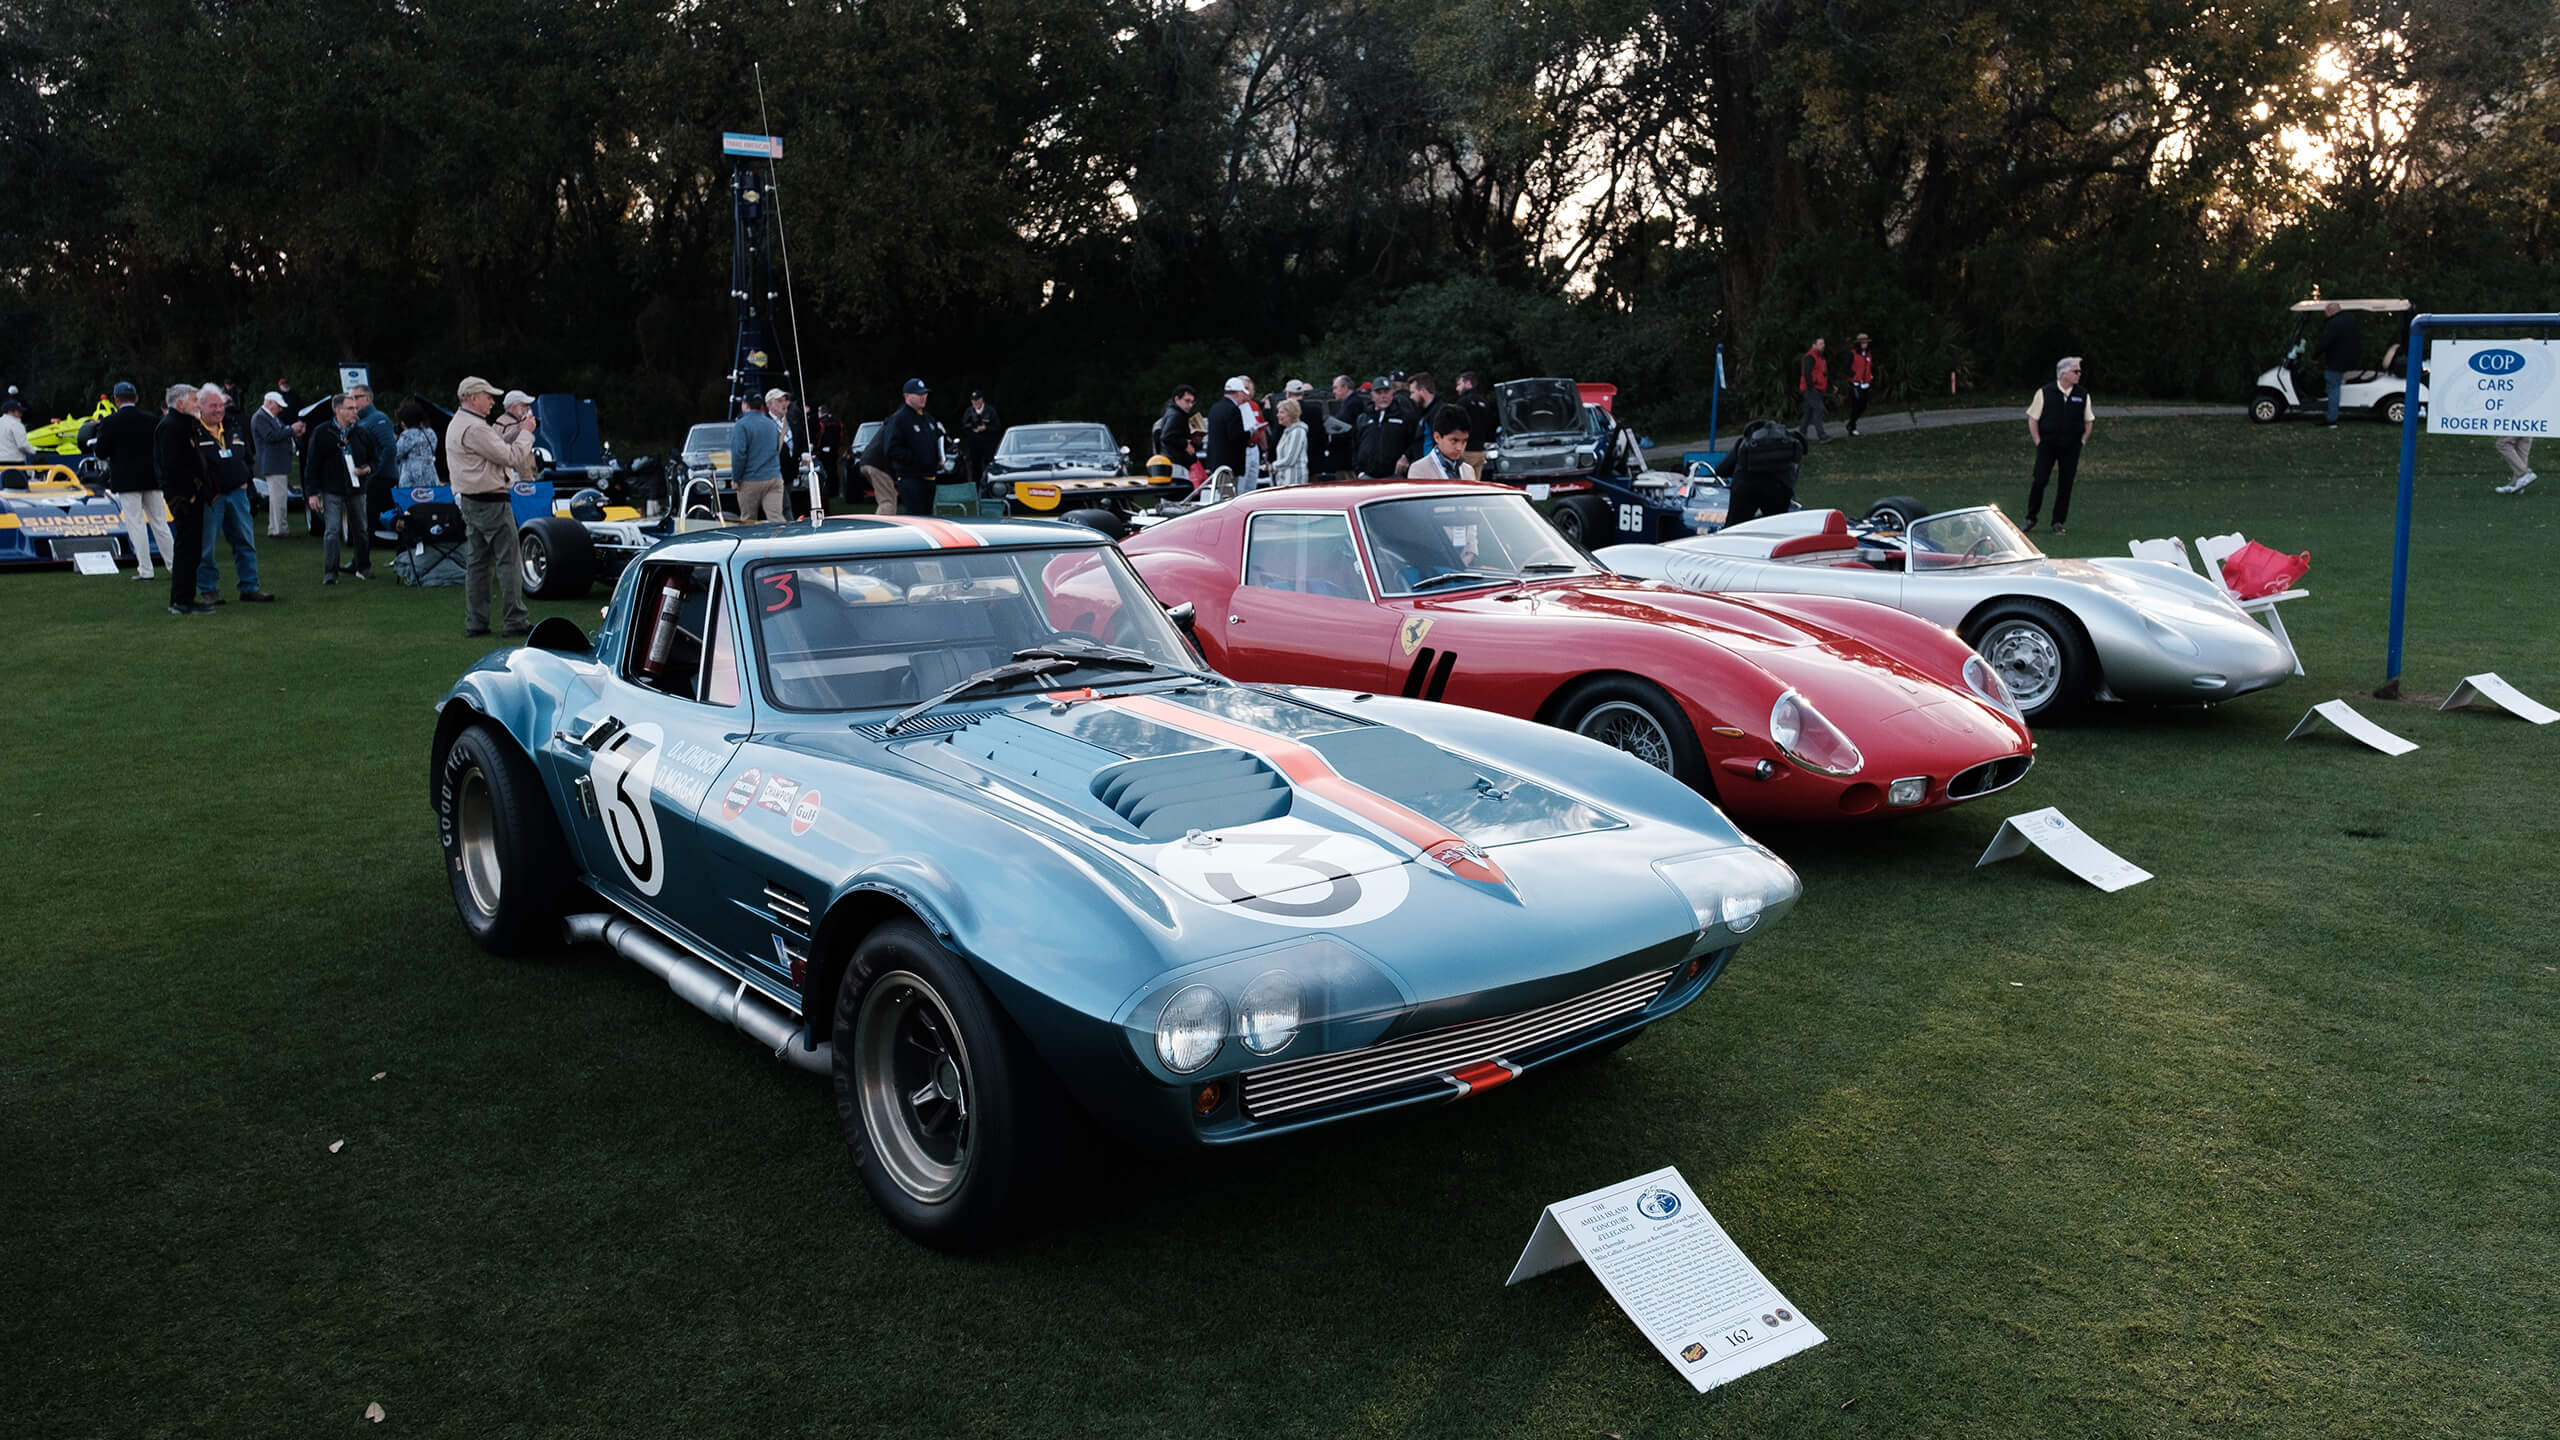 New May 2021 date for Amelia Island concours